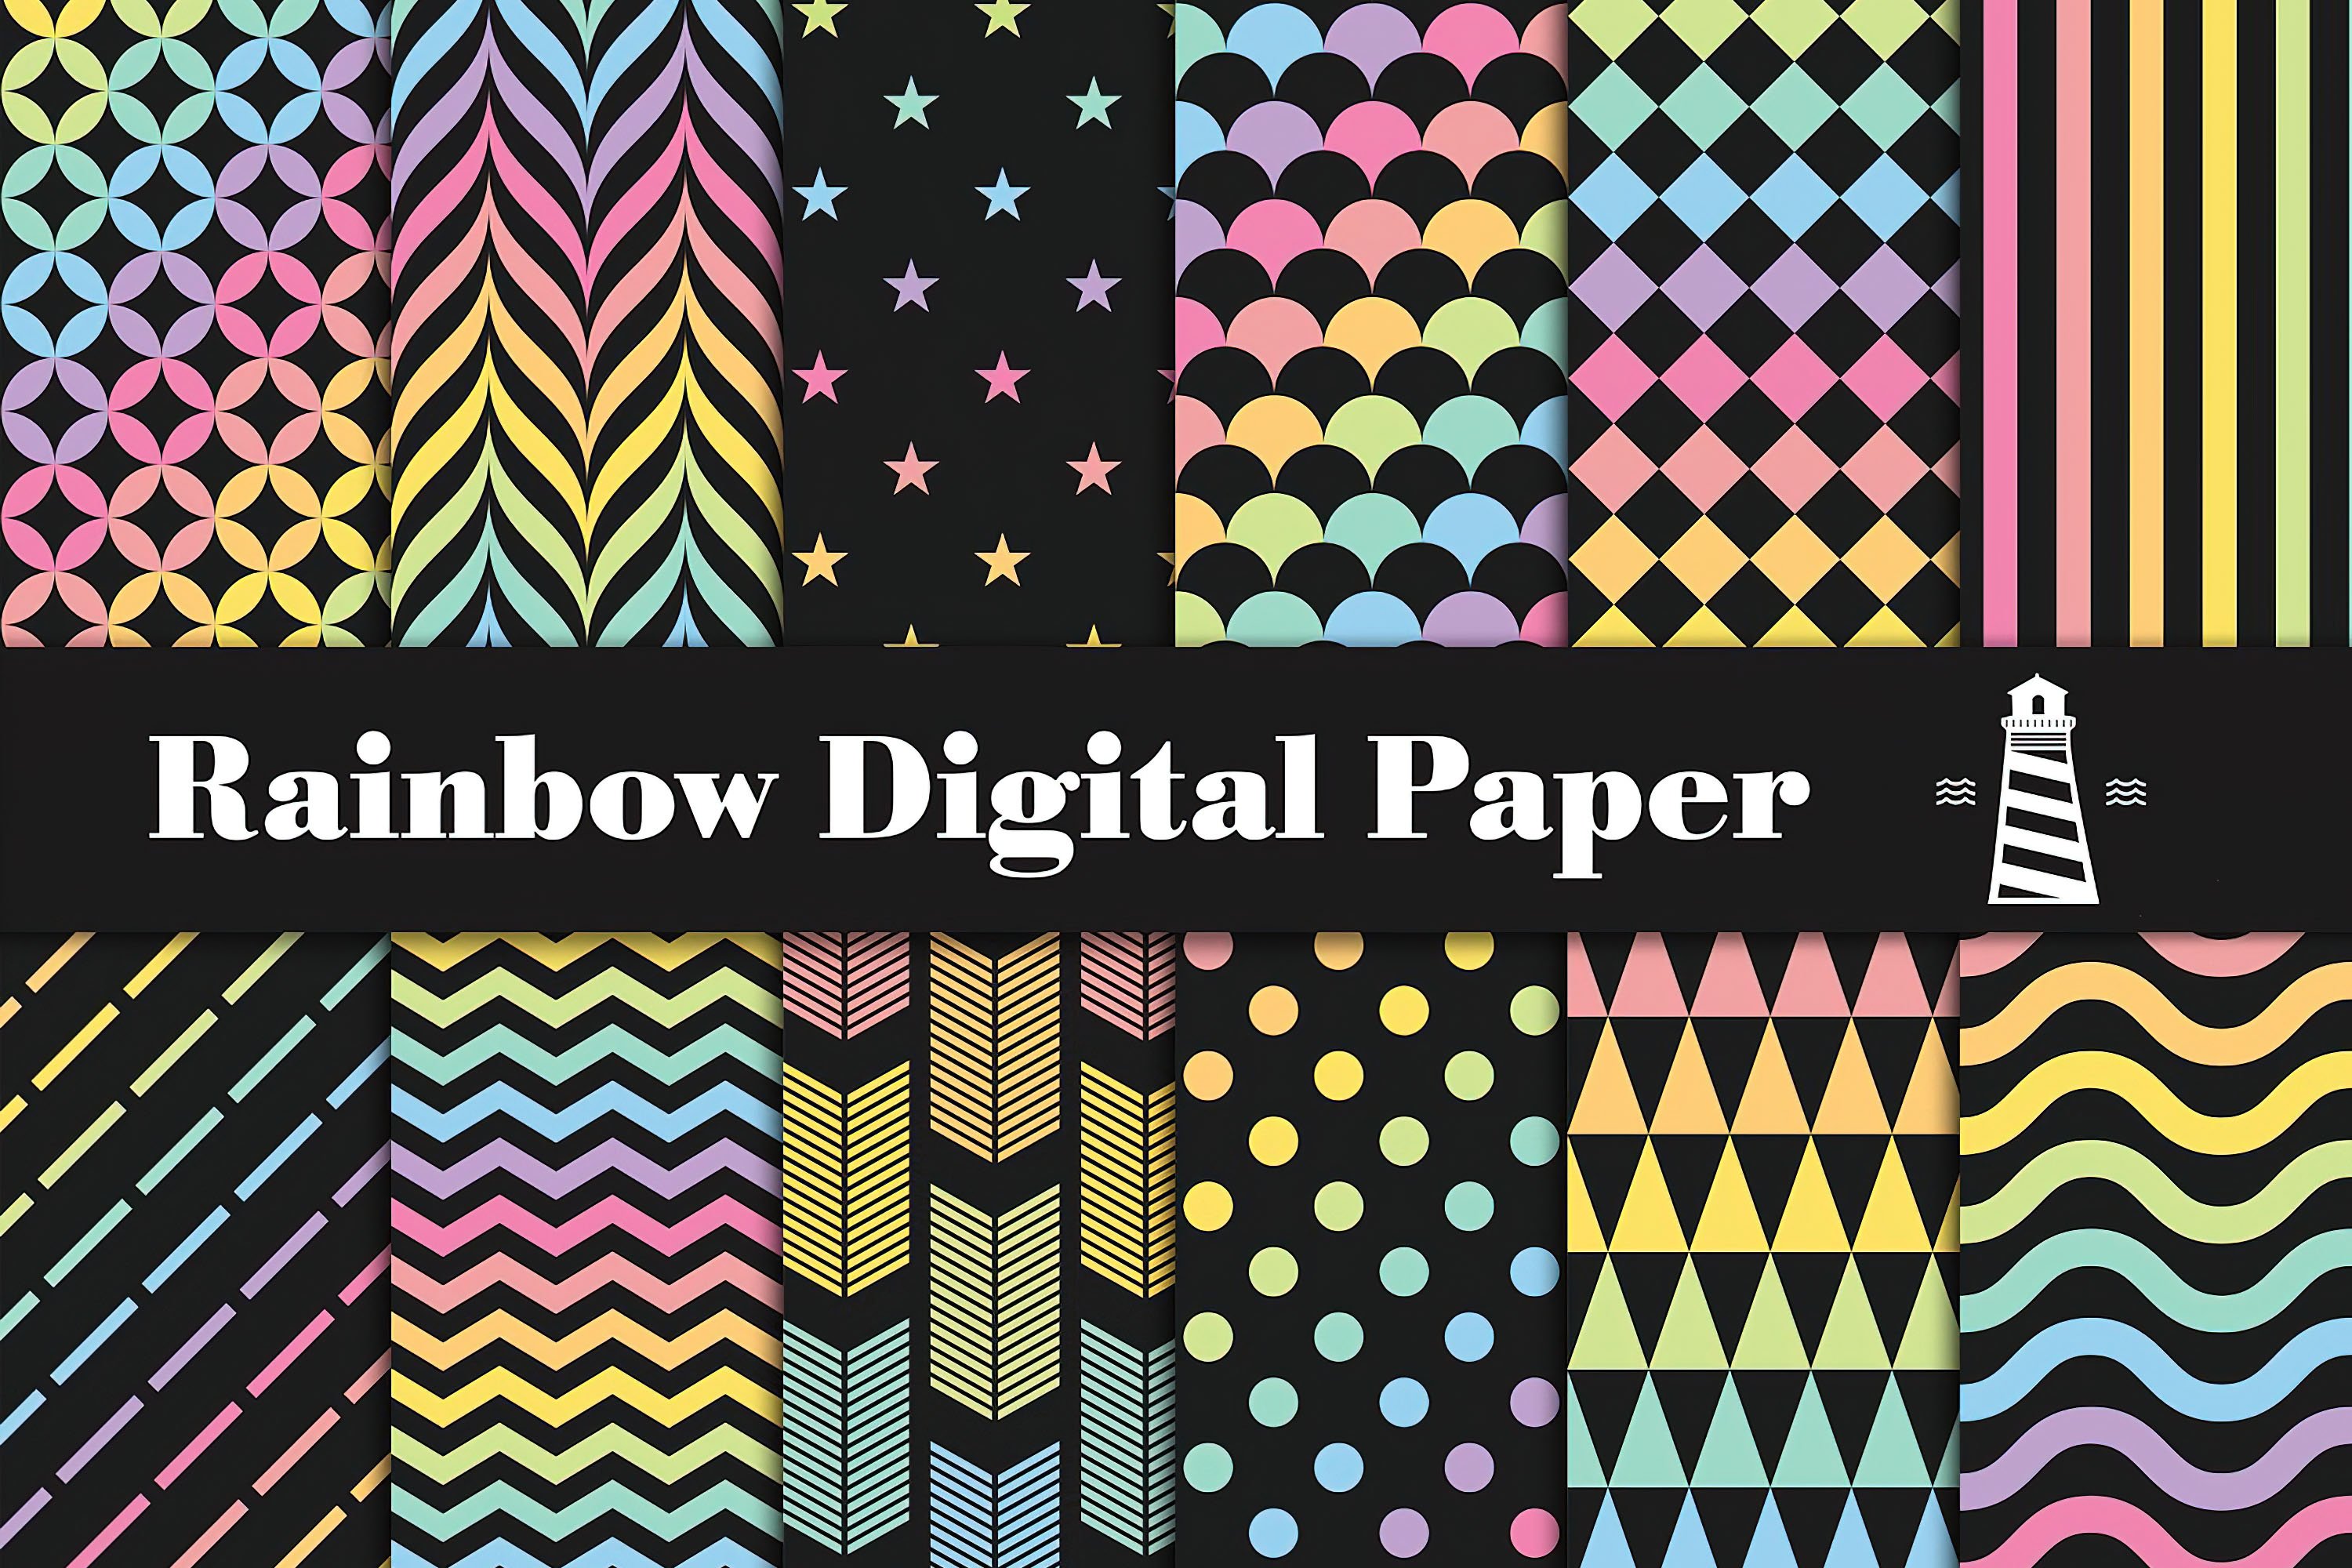 Rainbow Patterned Backgrounds cover image.